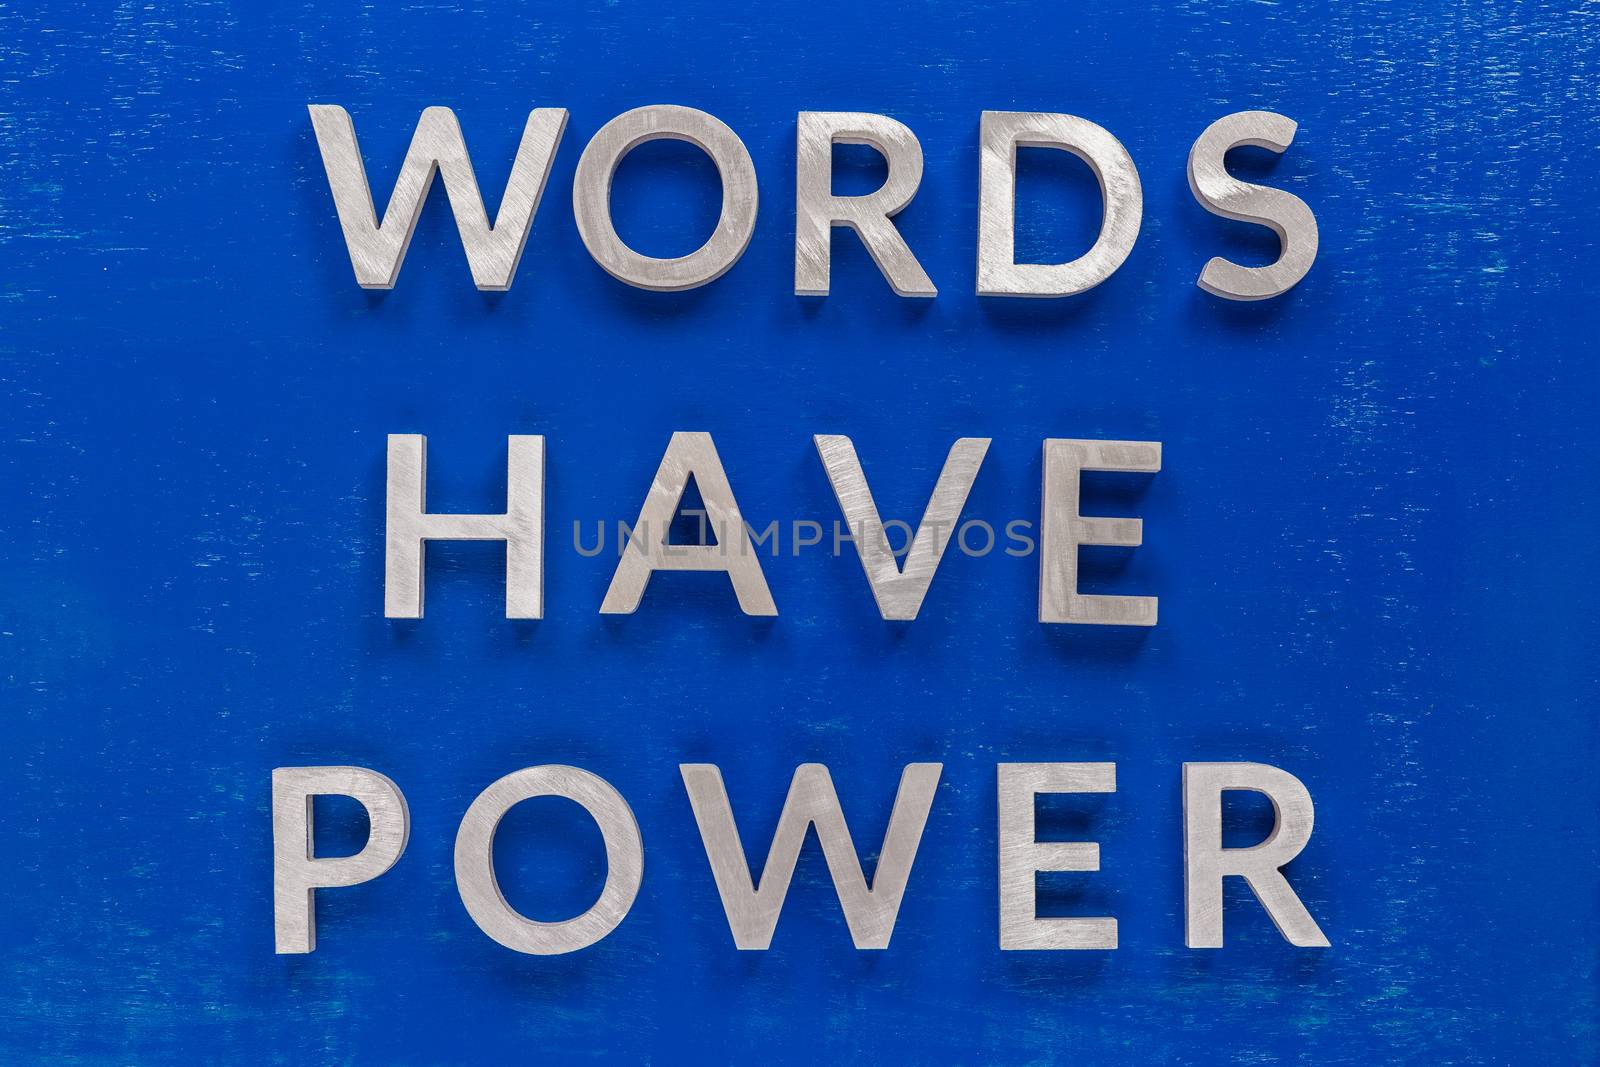 The phrase words have power laid on blue painted board with thick silver metal aphabet characters. by z1b